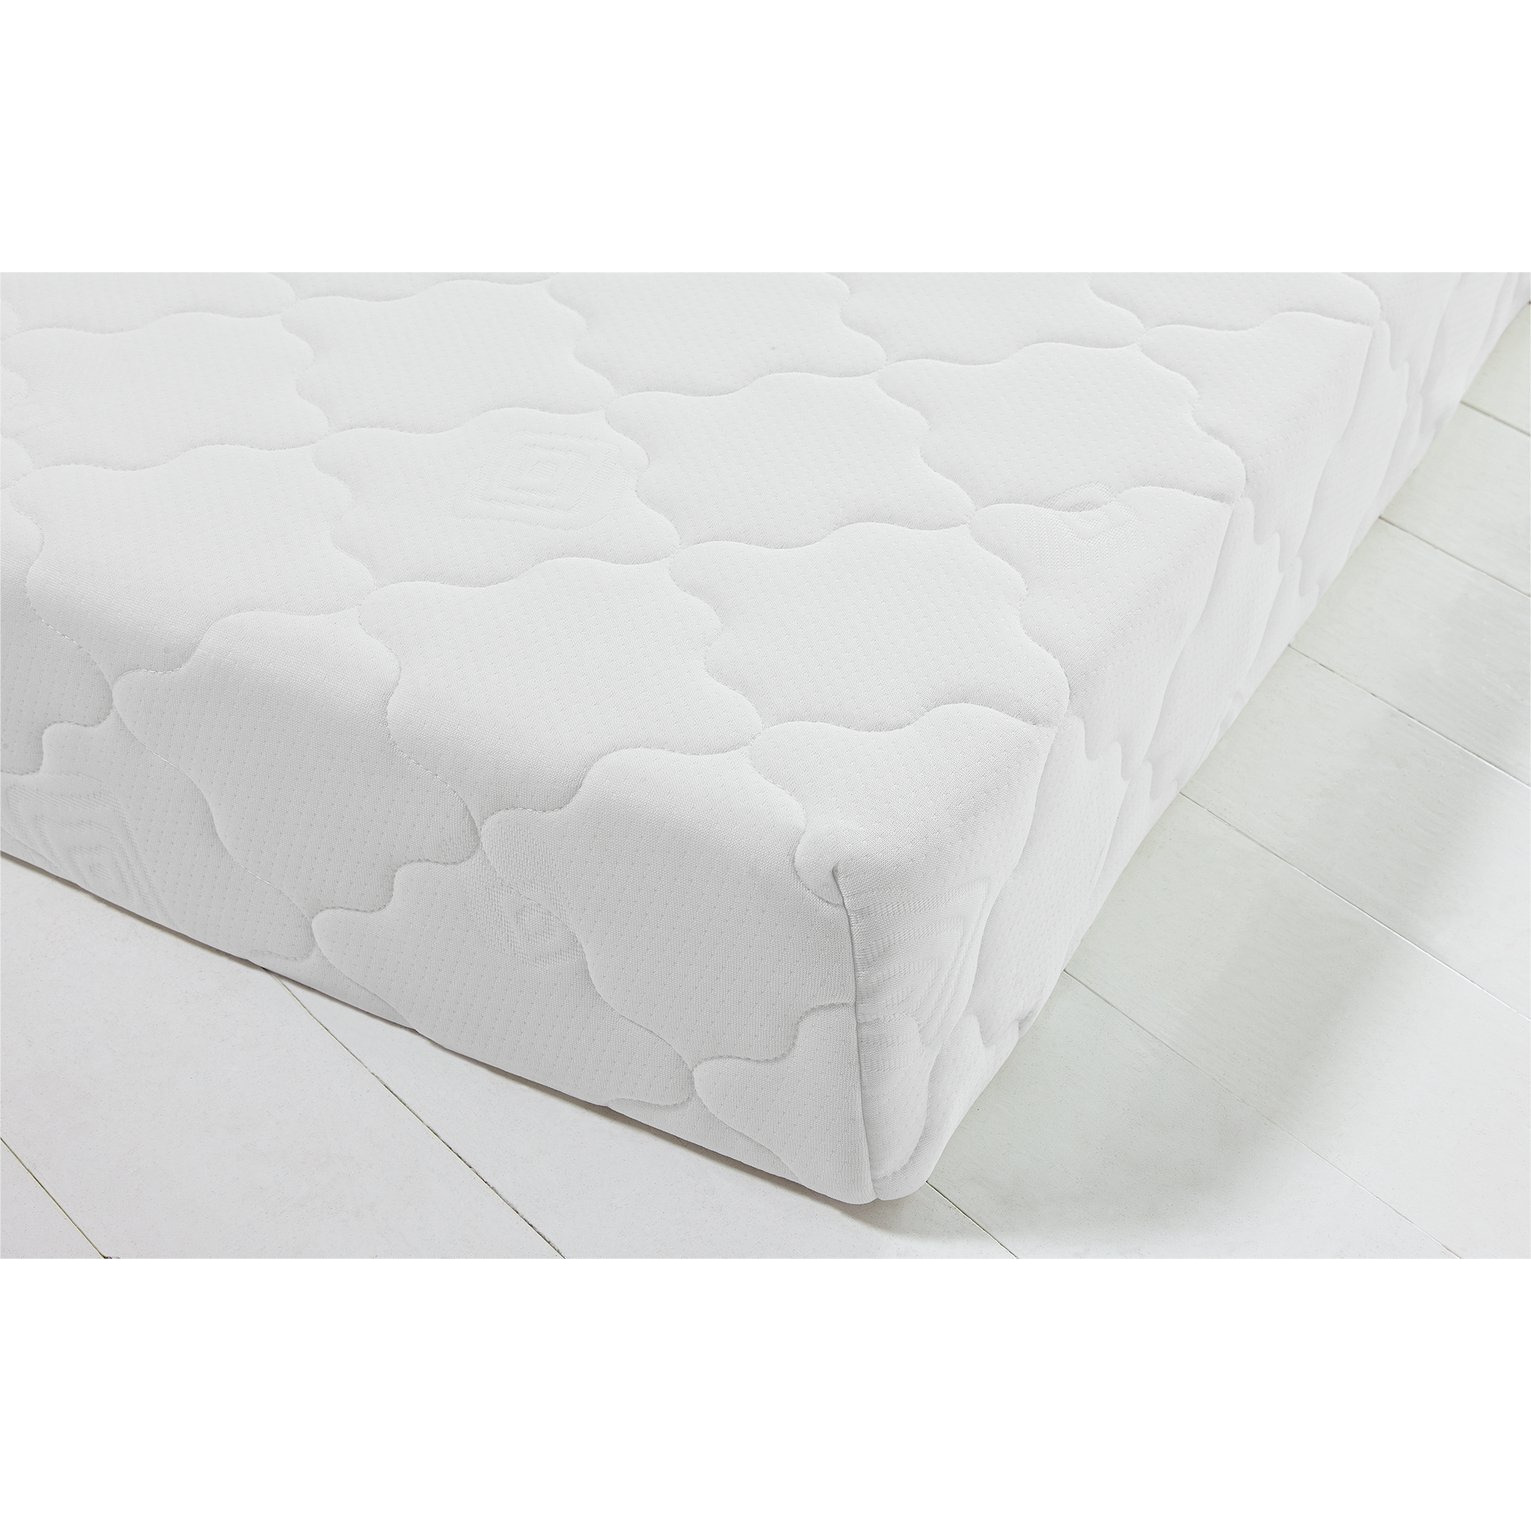 Argos Home Collect & Go Memory Foam Rolled Single Mattress - image 1